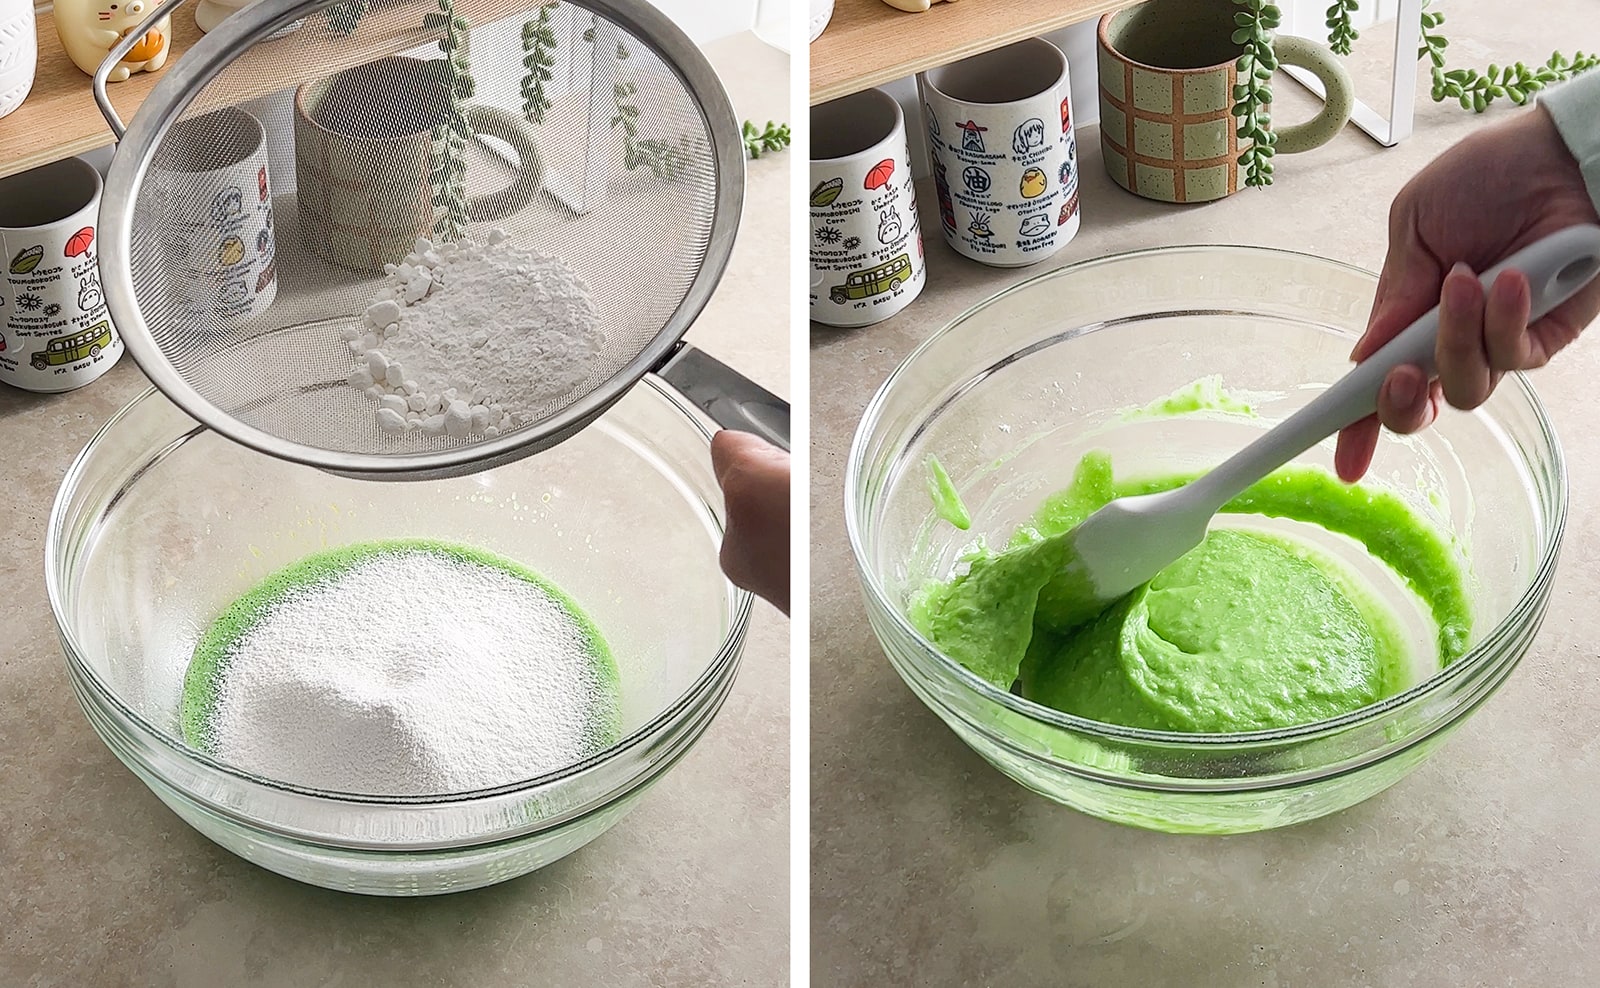 Left to right: sifting flour into cake batter from a sieve, hand folding cake batter together with a spatula.